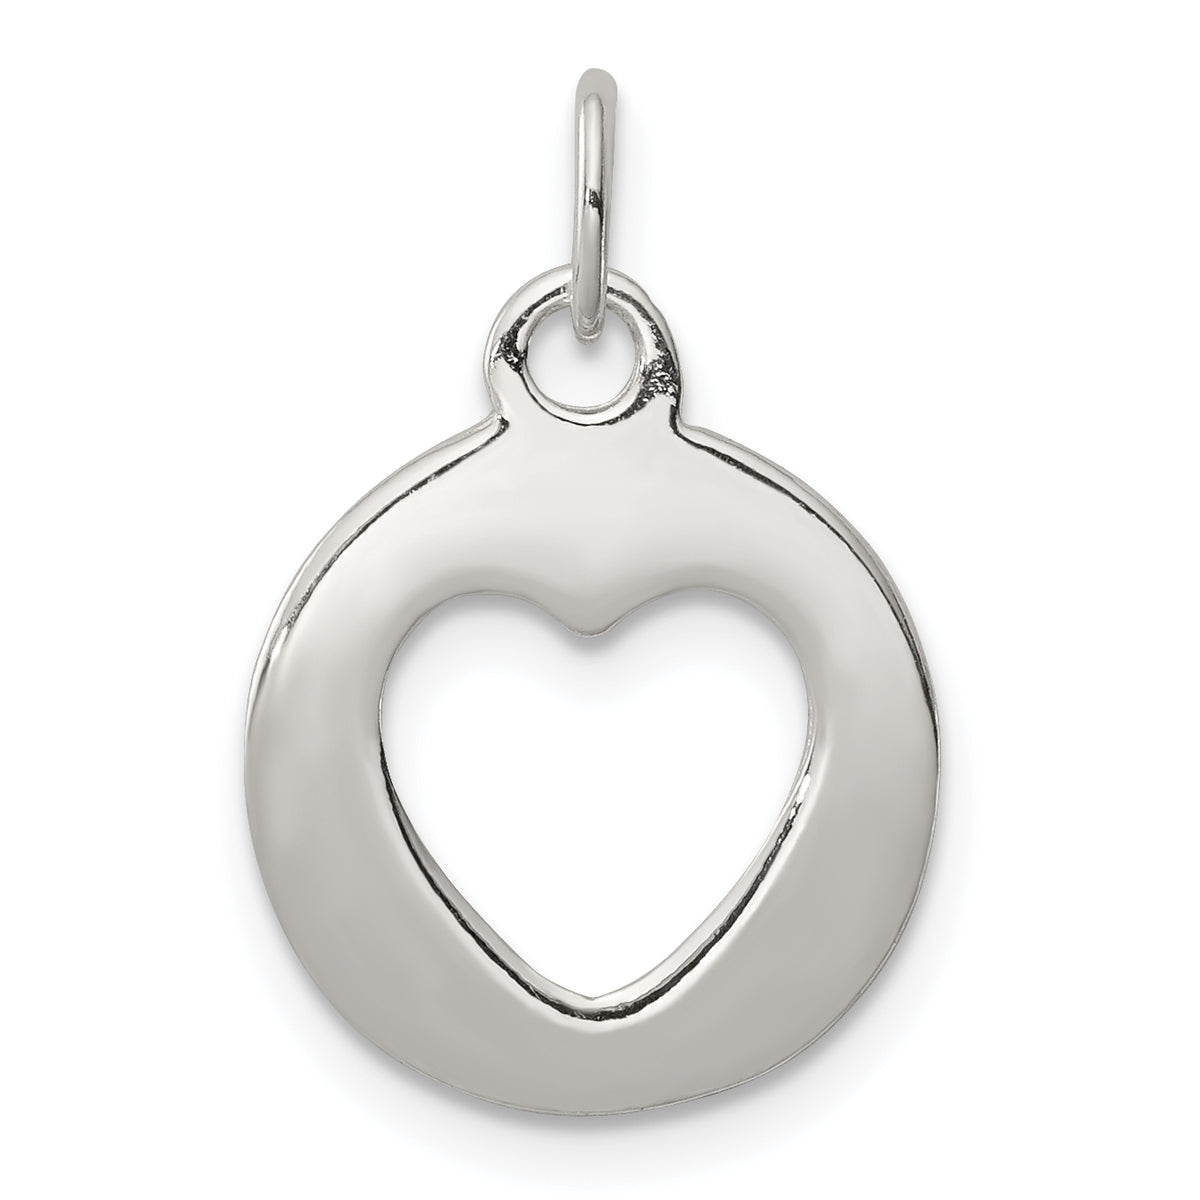 Sterling Silver Polished Circle with Punch Out Heart Charm